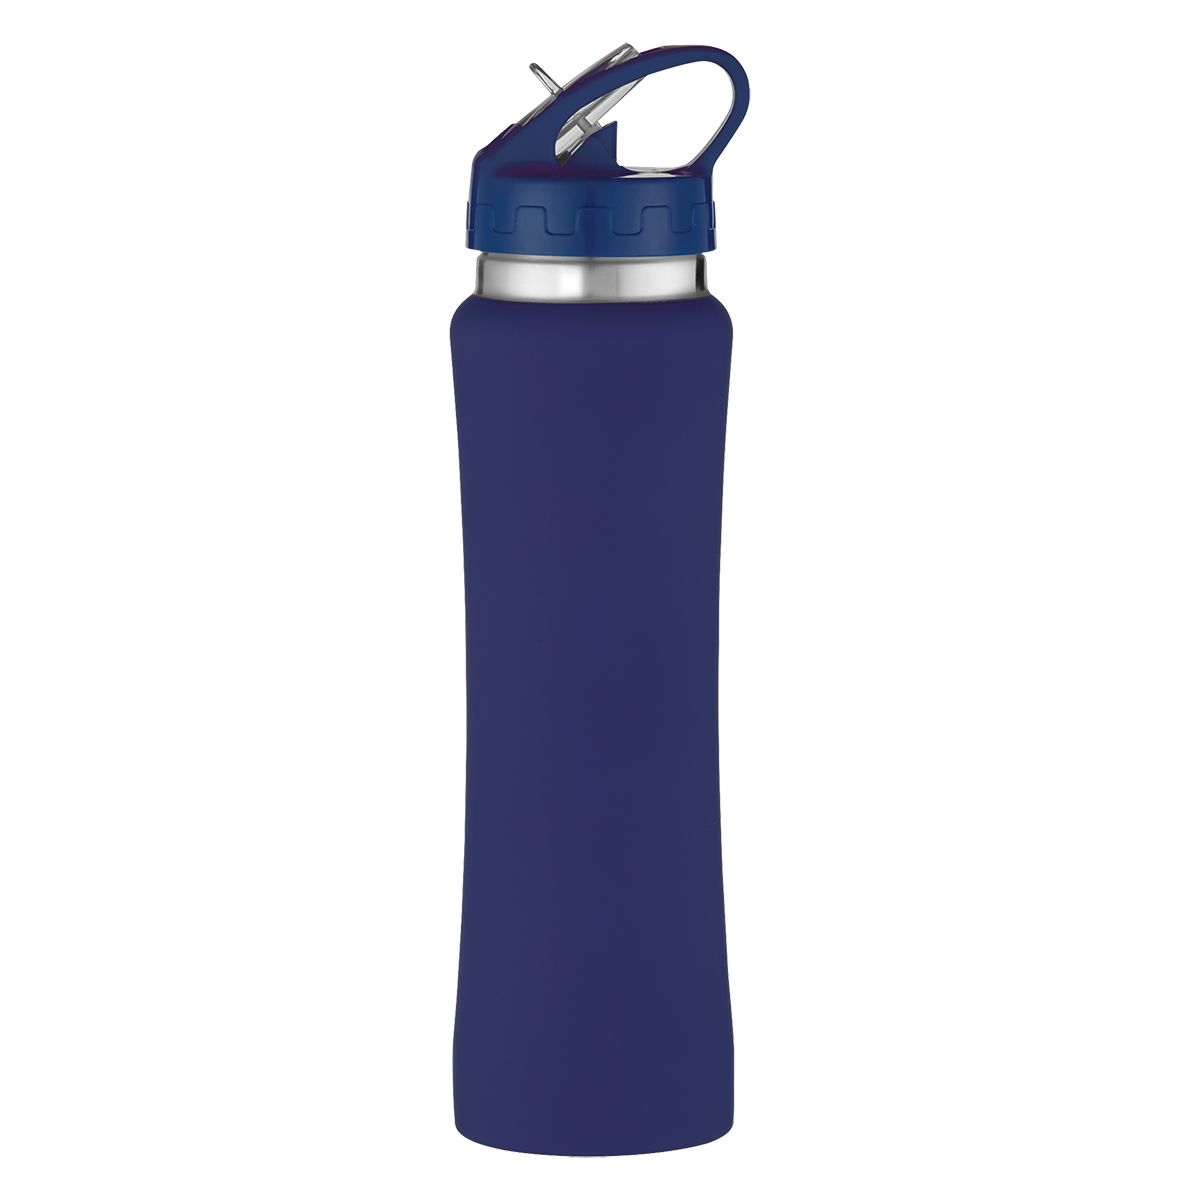 Blue Pilot Bottle, 74oz, Sold by at Home